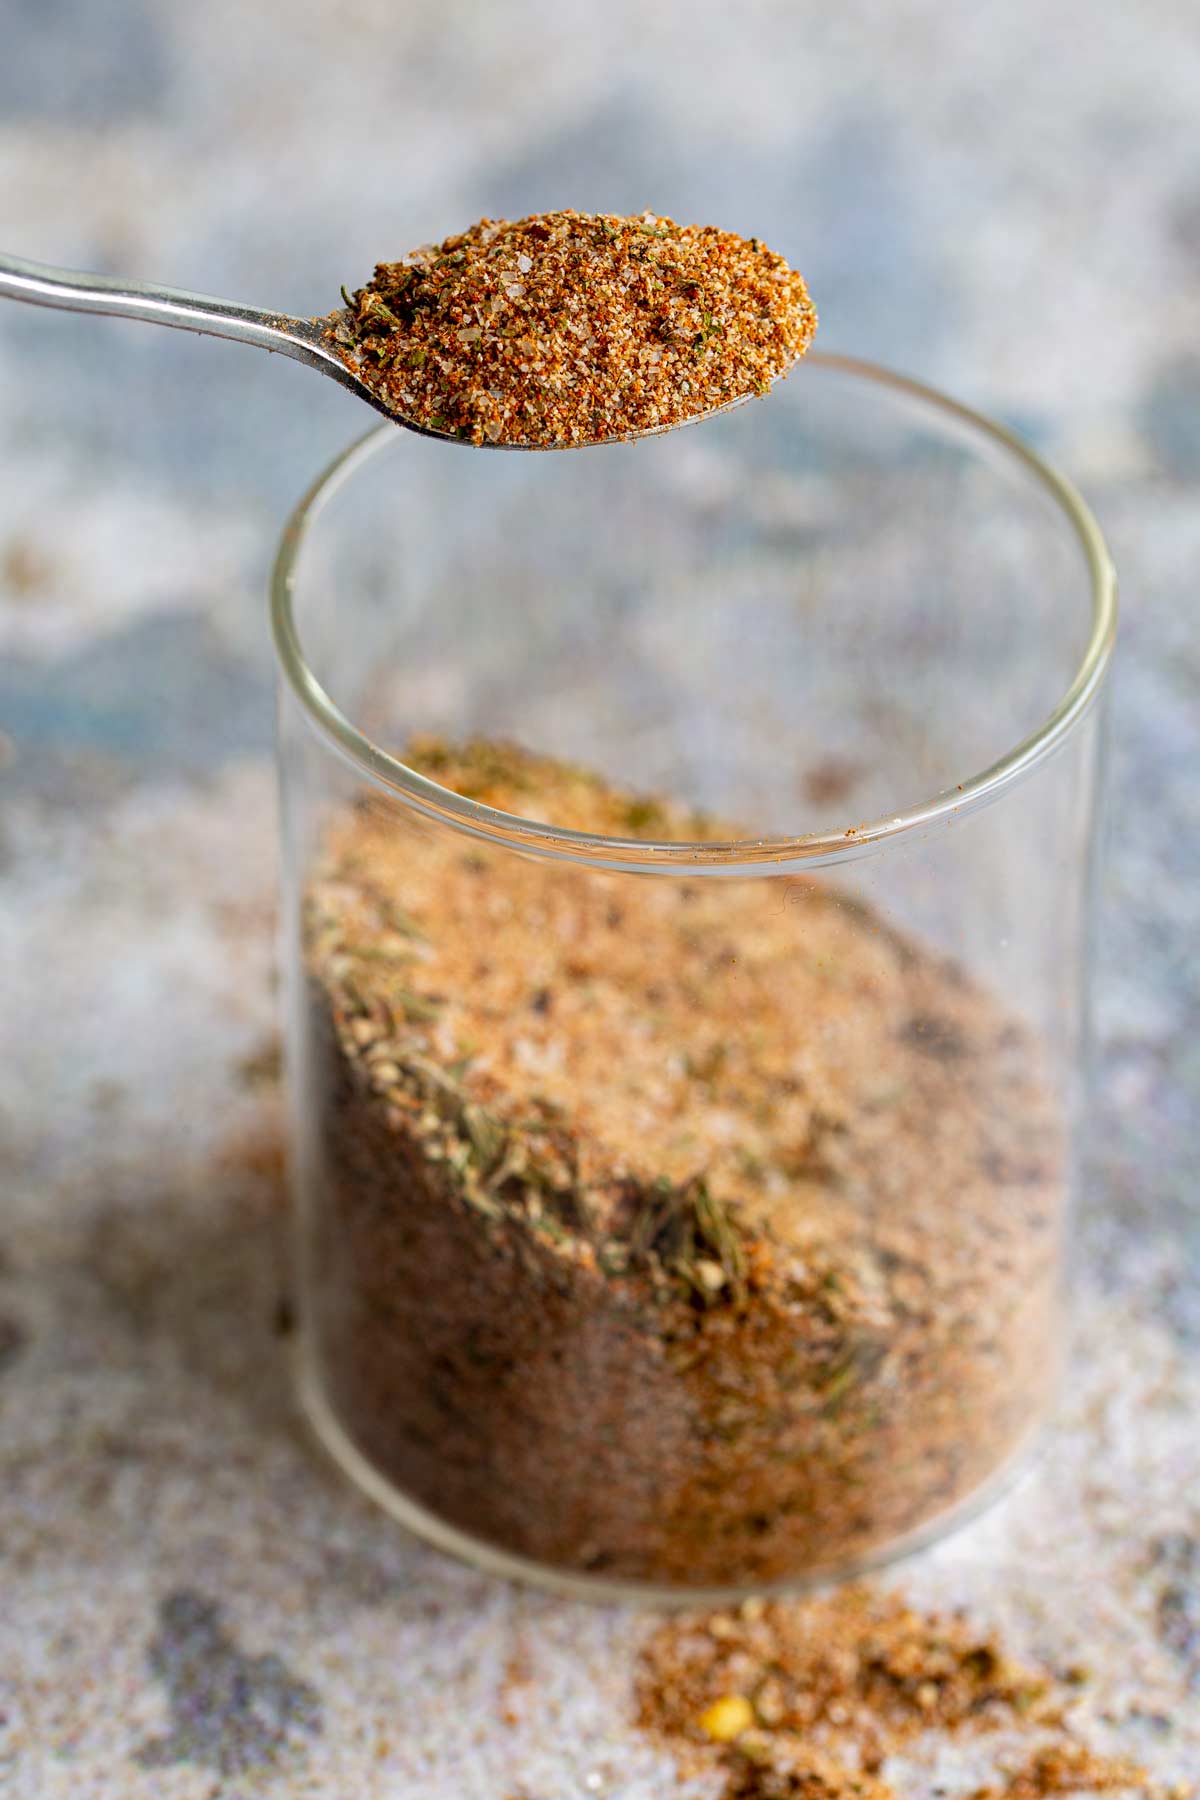 a spoon lifting a seasoning blend from a glass jar